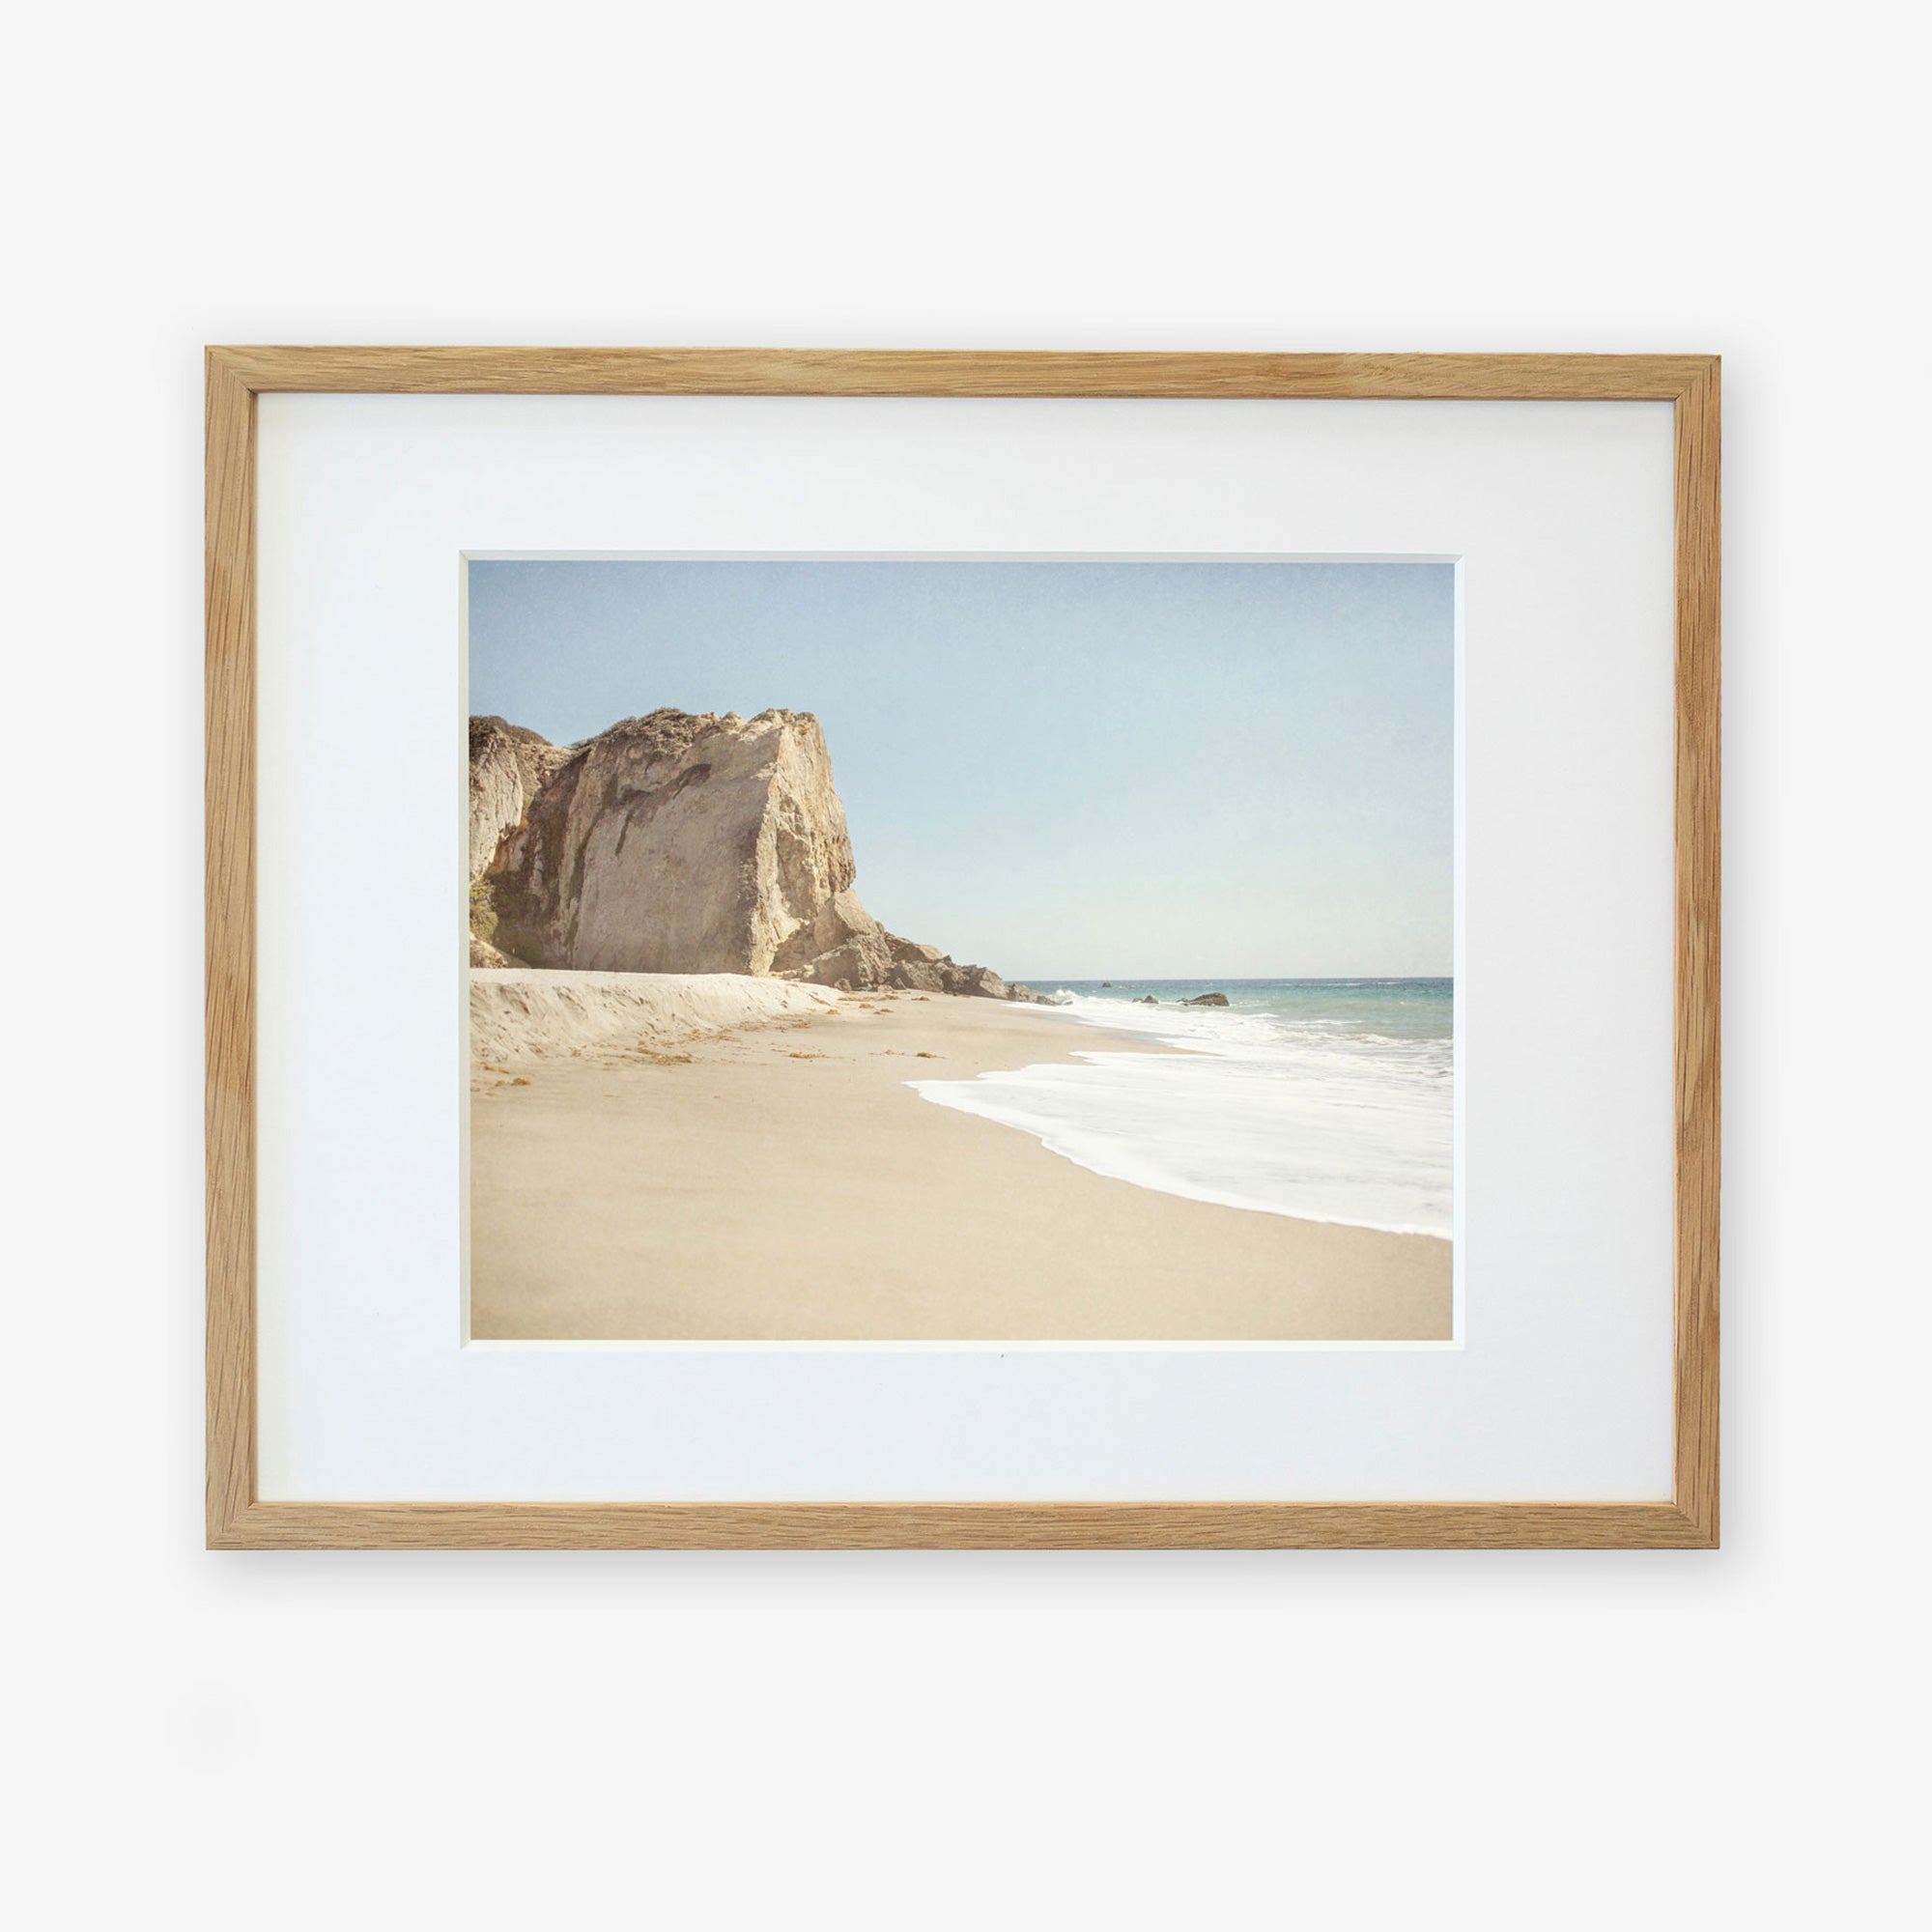 Offley Green's California Malibu Print, 'Point Dume' depicts a serene beachscape featuring a sandy beach with gentle waves at Point Dume, flanked by a large, rugged cliff under a clear sky.